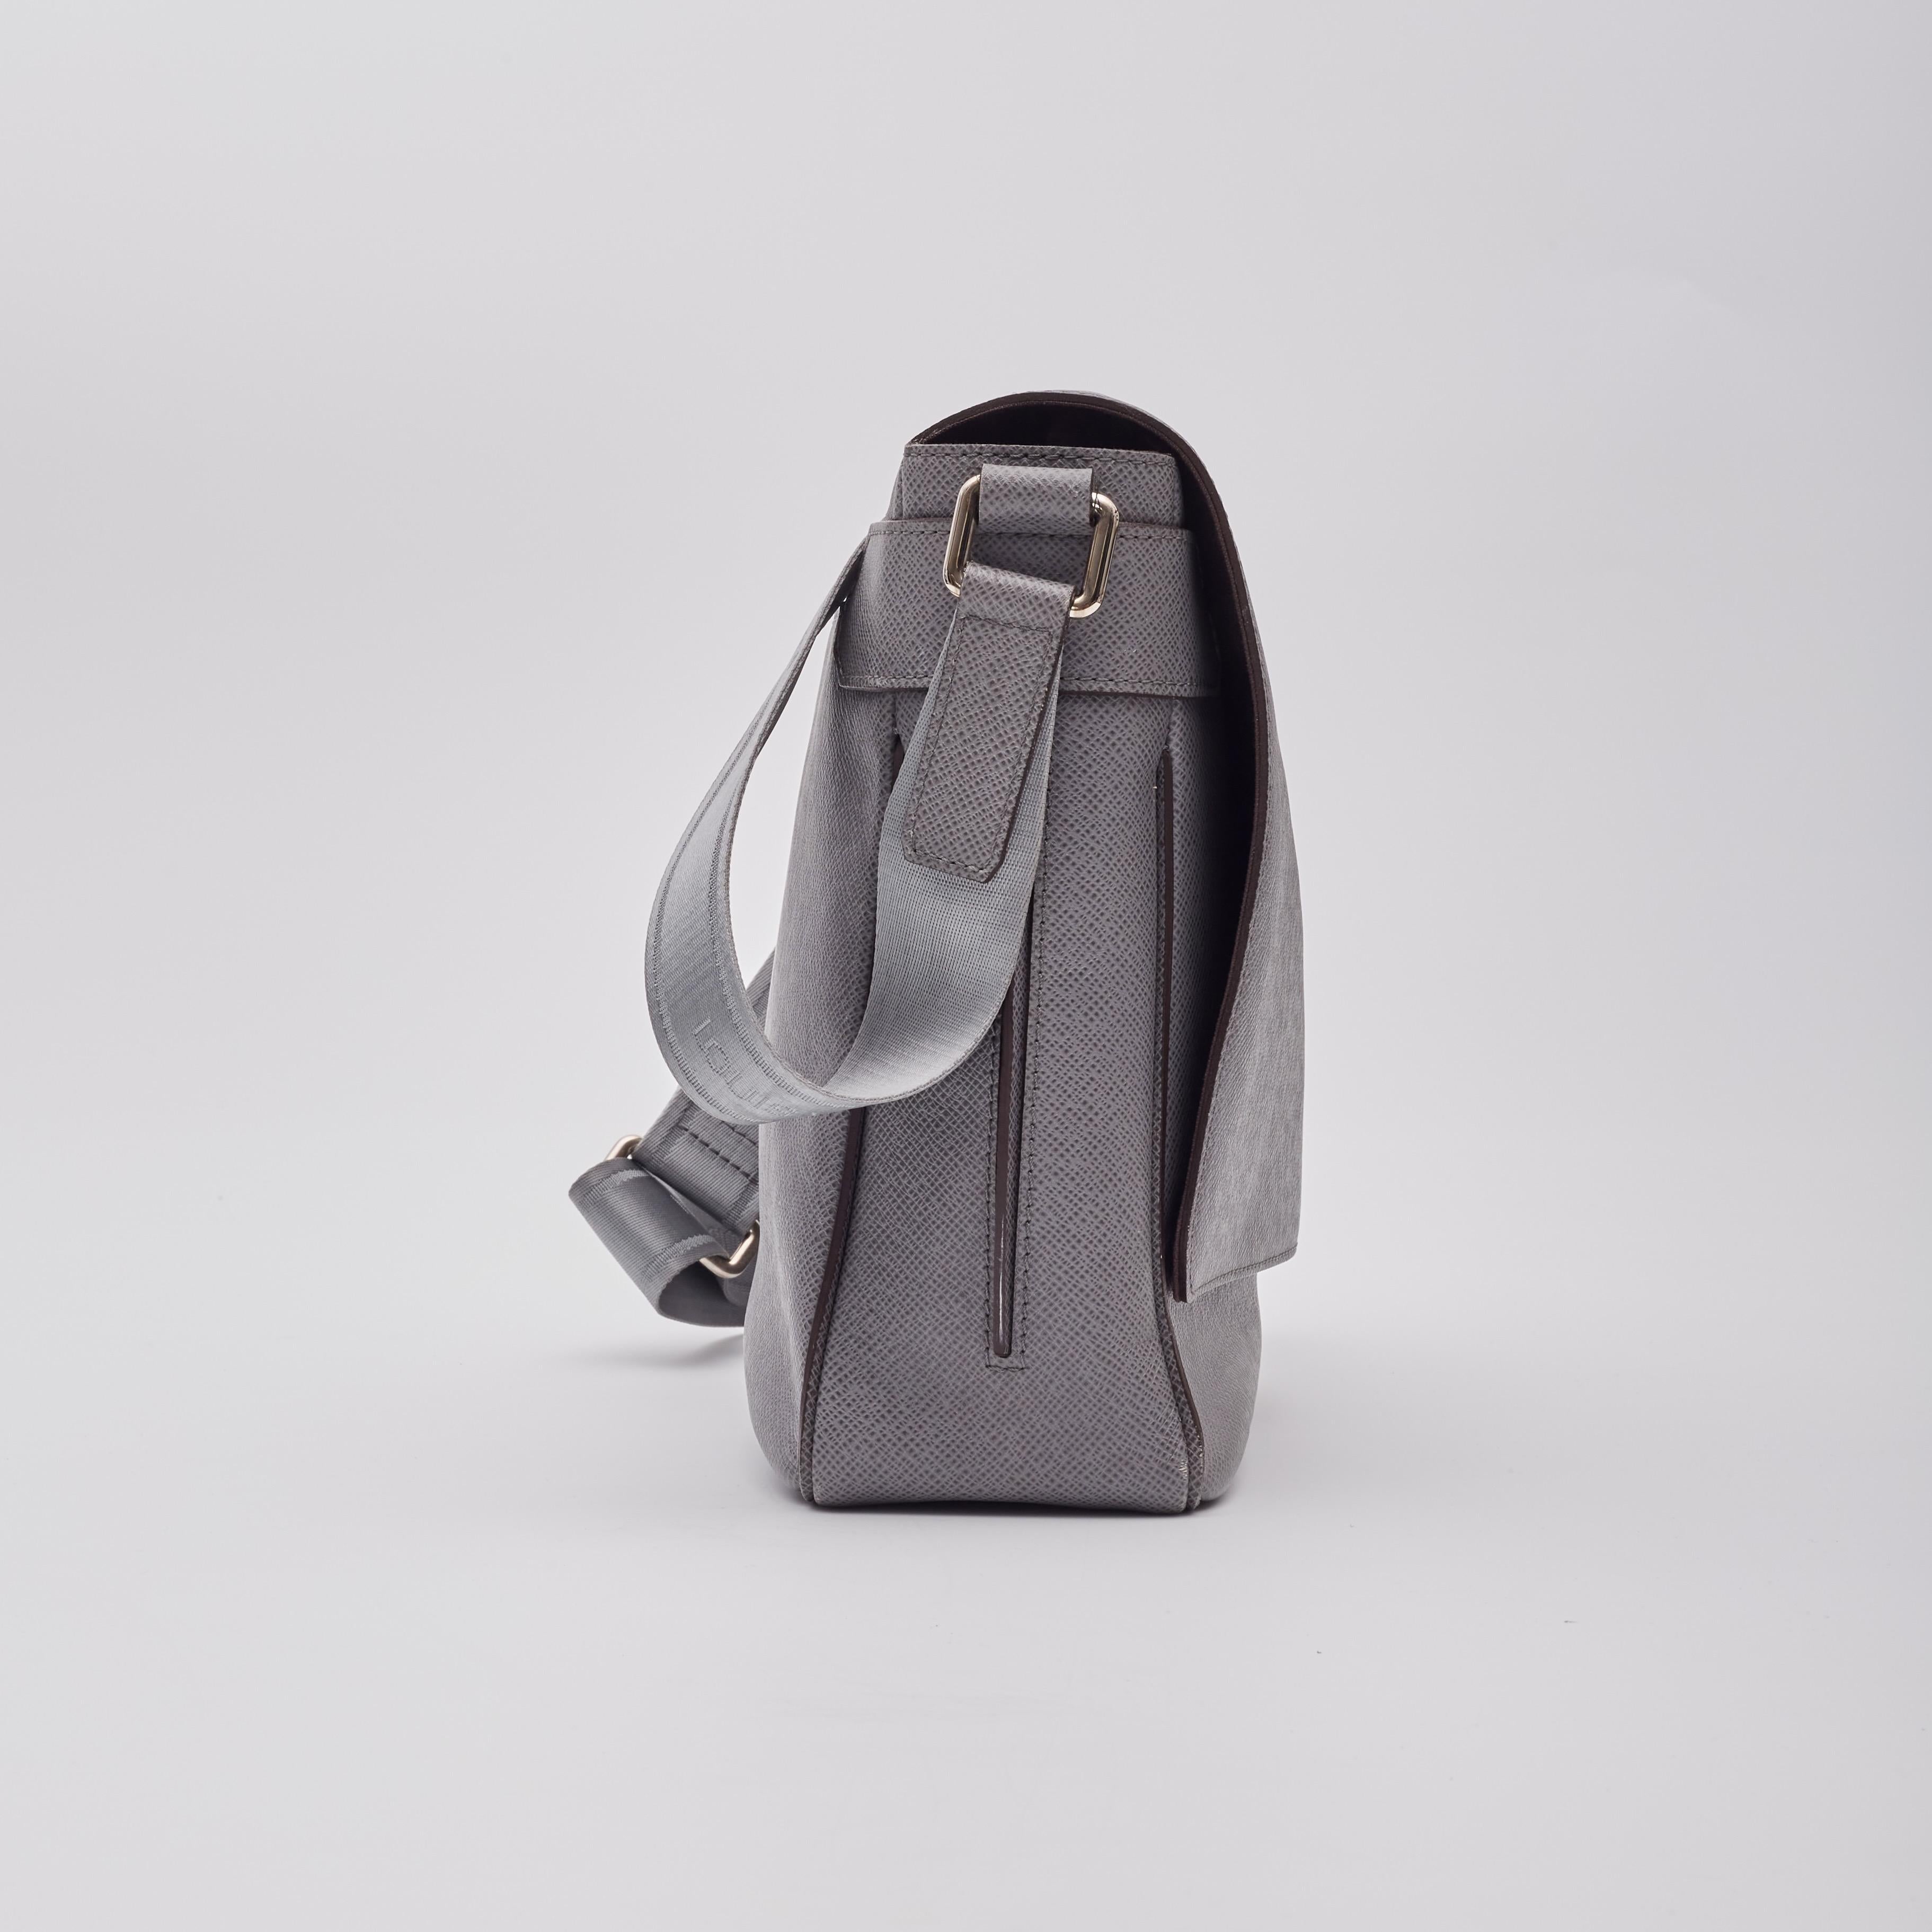 This messenger bag is crafted of cross-grain leather in grey. The adjustable textile shoulder strap is emblazoned with Louis logo and the bag features a front flap that opens to a brown fabric interior with a zipper and patch pocket.

Color: